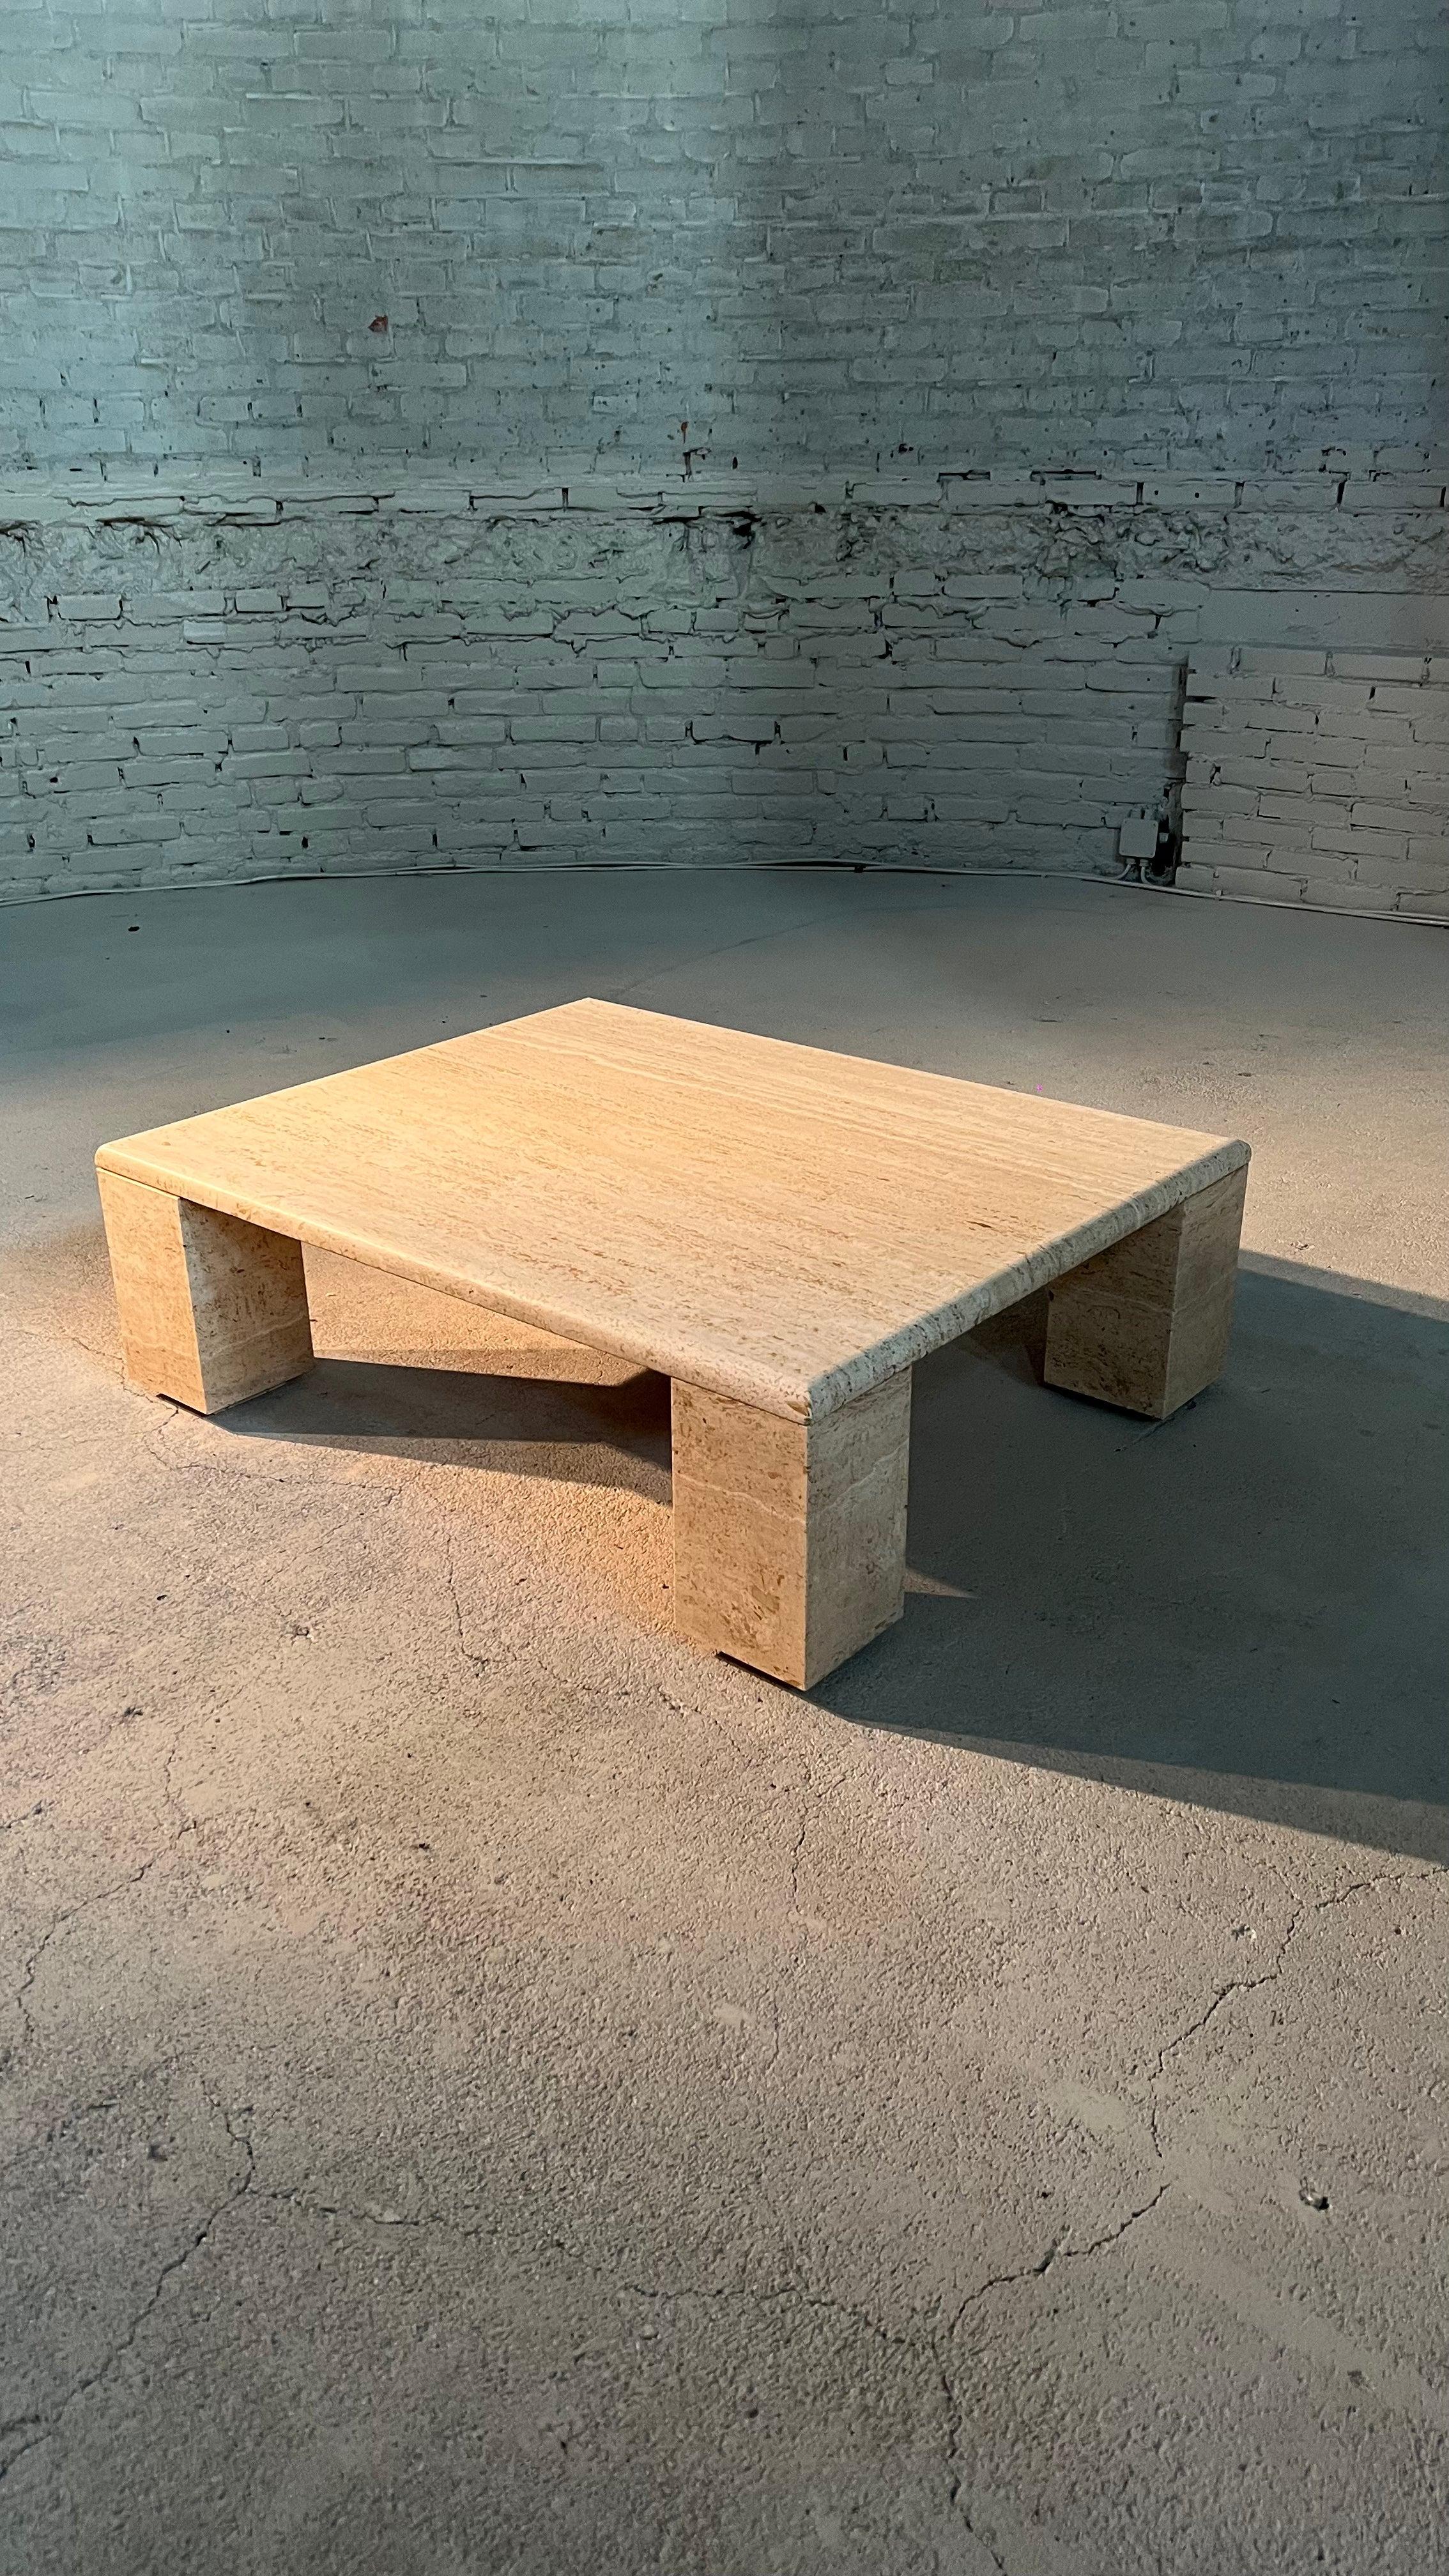 A large coffee table in Italian travertin dating from the 70's.

The table top rests on large blocks that can be used in 2 ways. The other leg option would creates a 2 cm slit between the legs and the table top. The marble has several beige tones